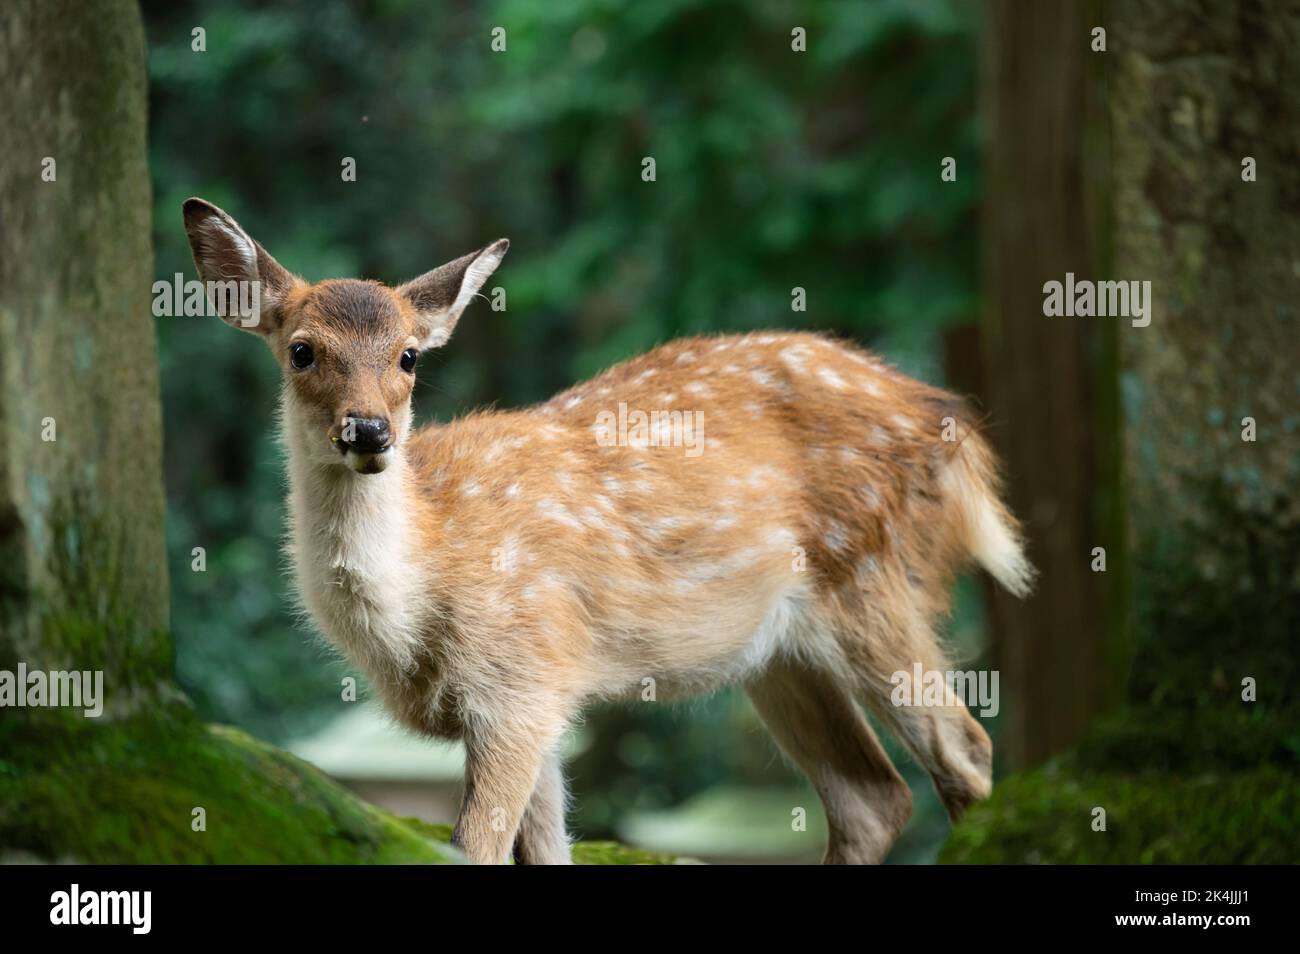 cute wild child deer in Nara,Kansai,Japan is a famous travel place. Stock Photo